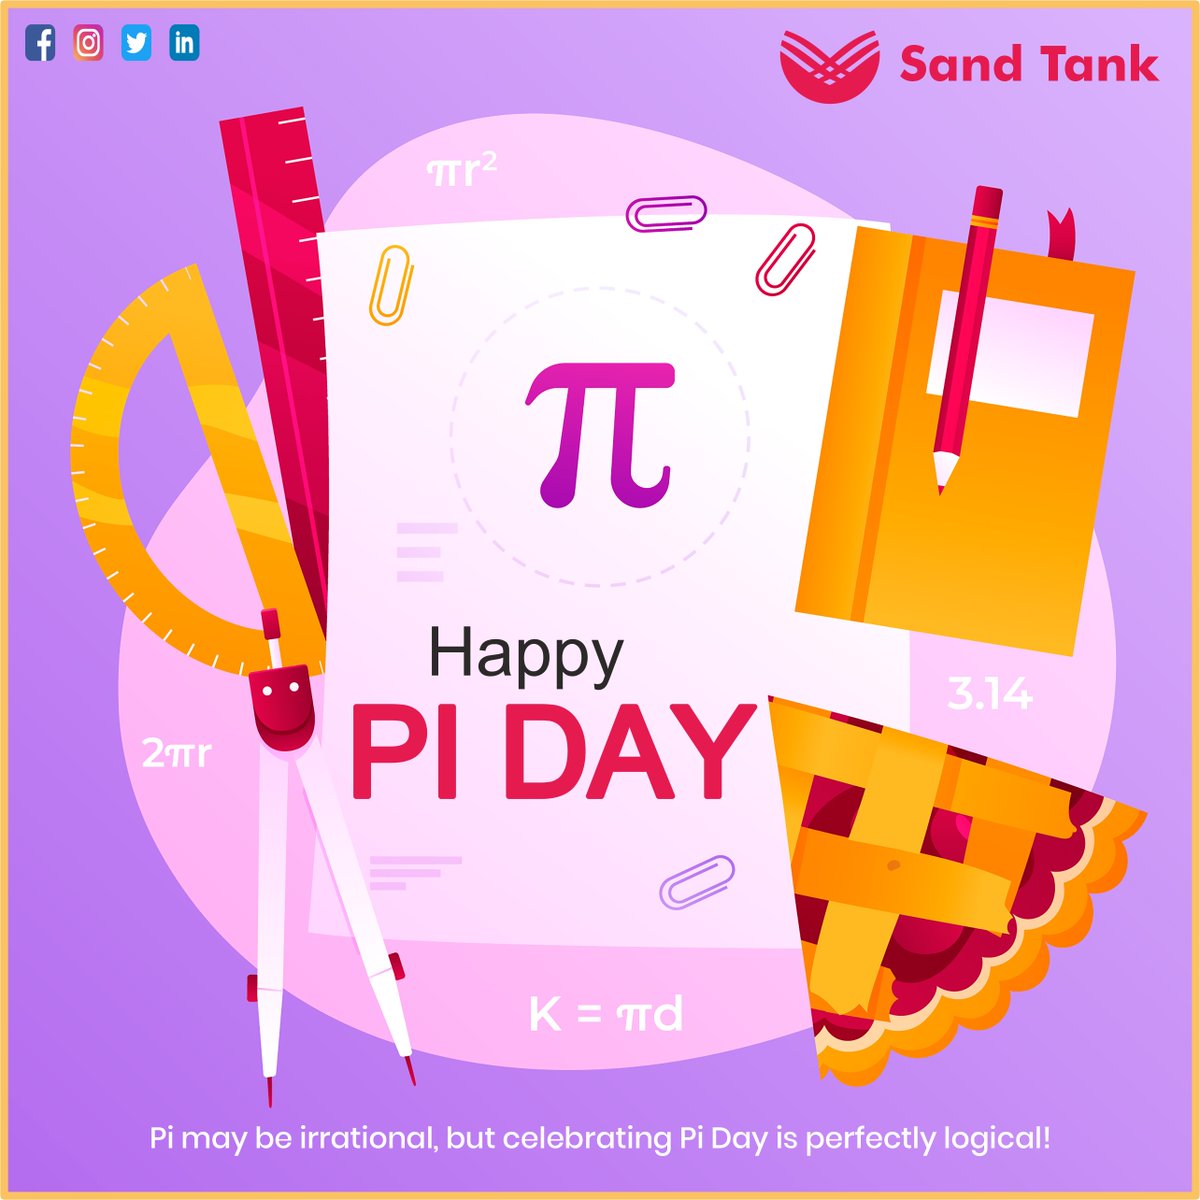 Wishing you all a happy Pi Day filled with mathematical marvels and mouthwatering pies! Indulge your inner geek and satisfy your sweet tooth today! 🤓🥧 

#Sandtank #Piday #Pieday2024 #Nationalpieday #happypiday #Mathematics #Mathstutor #GeekOut #Mathschallenge #Mathsteacher